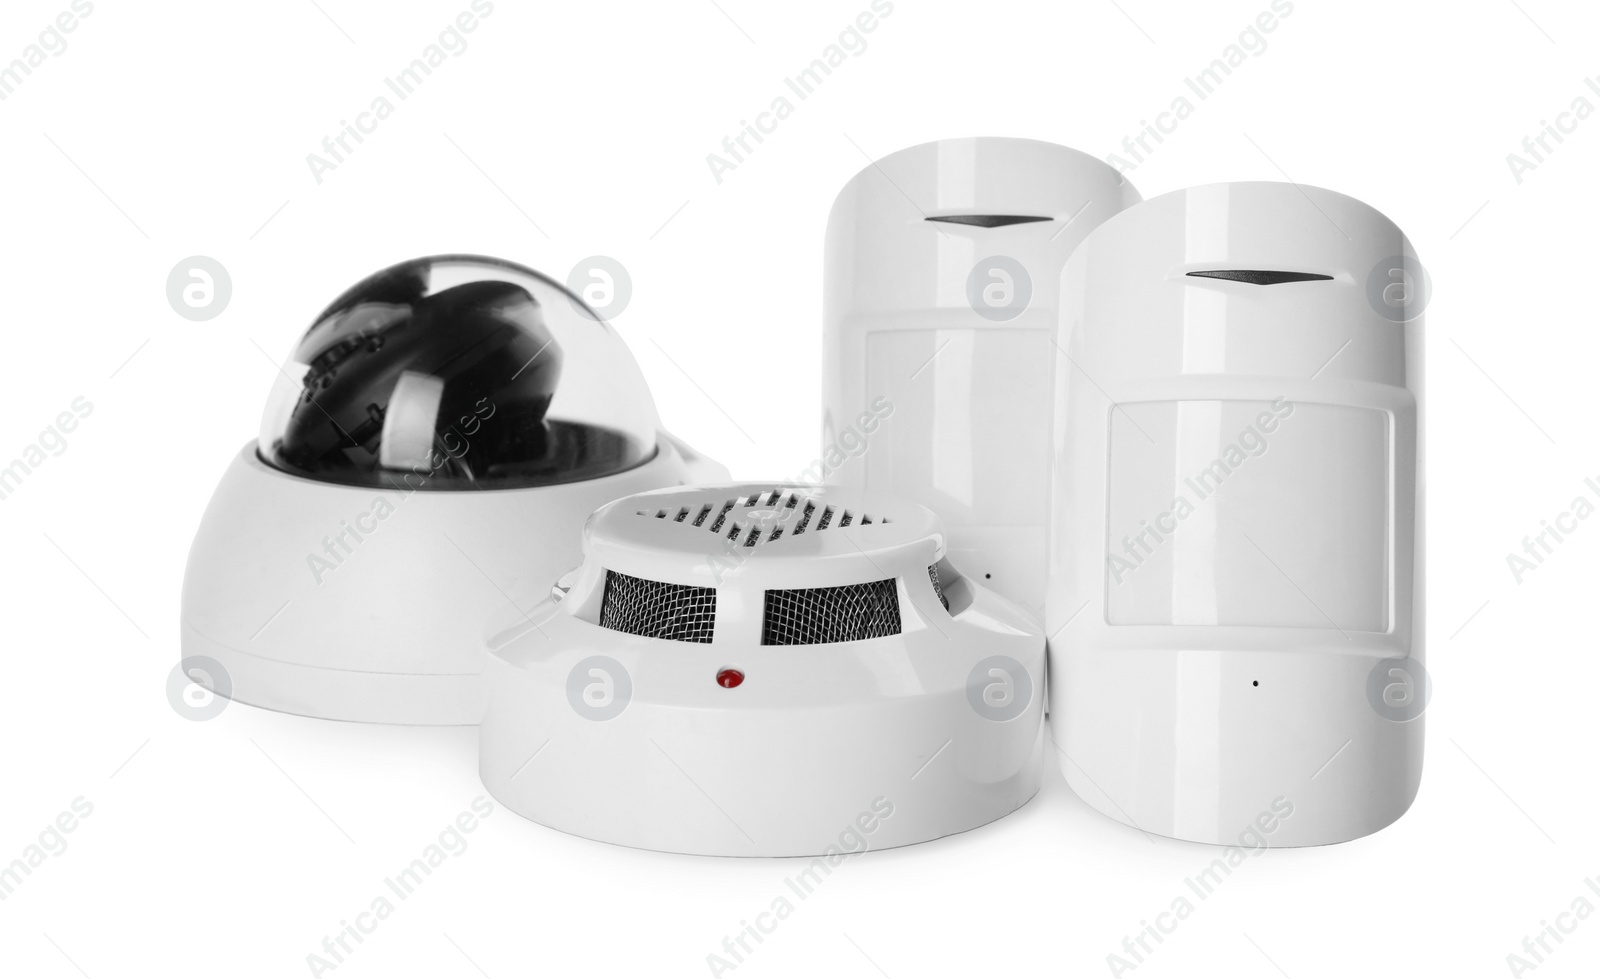 Photo of CCTV camera, smoke and movement detectors on white background. Home security system